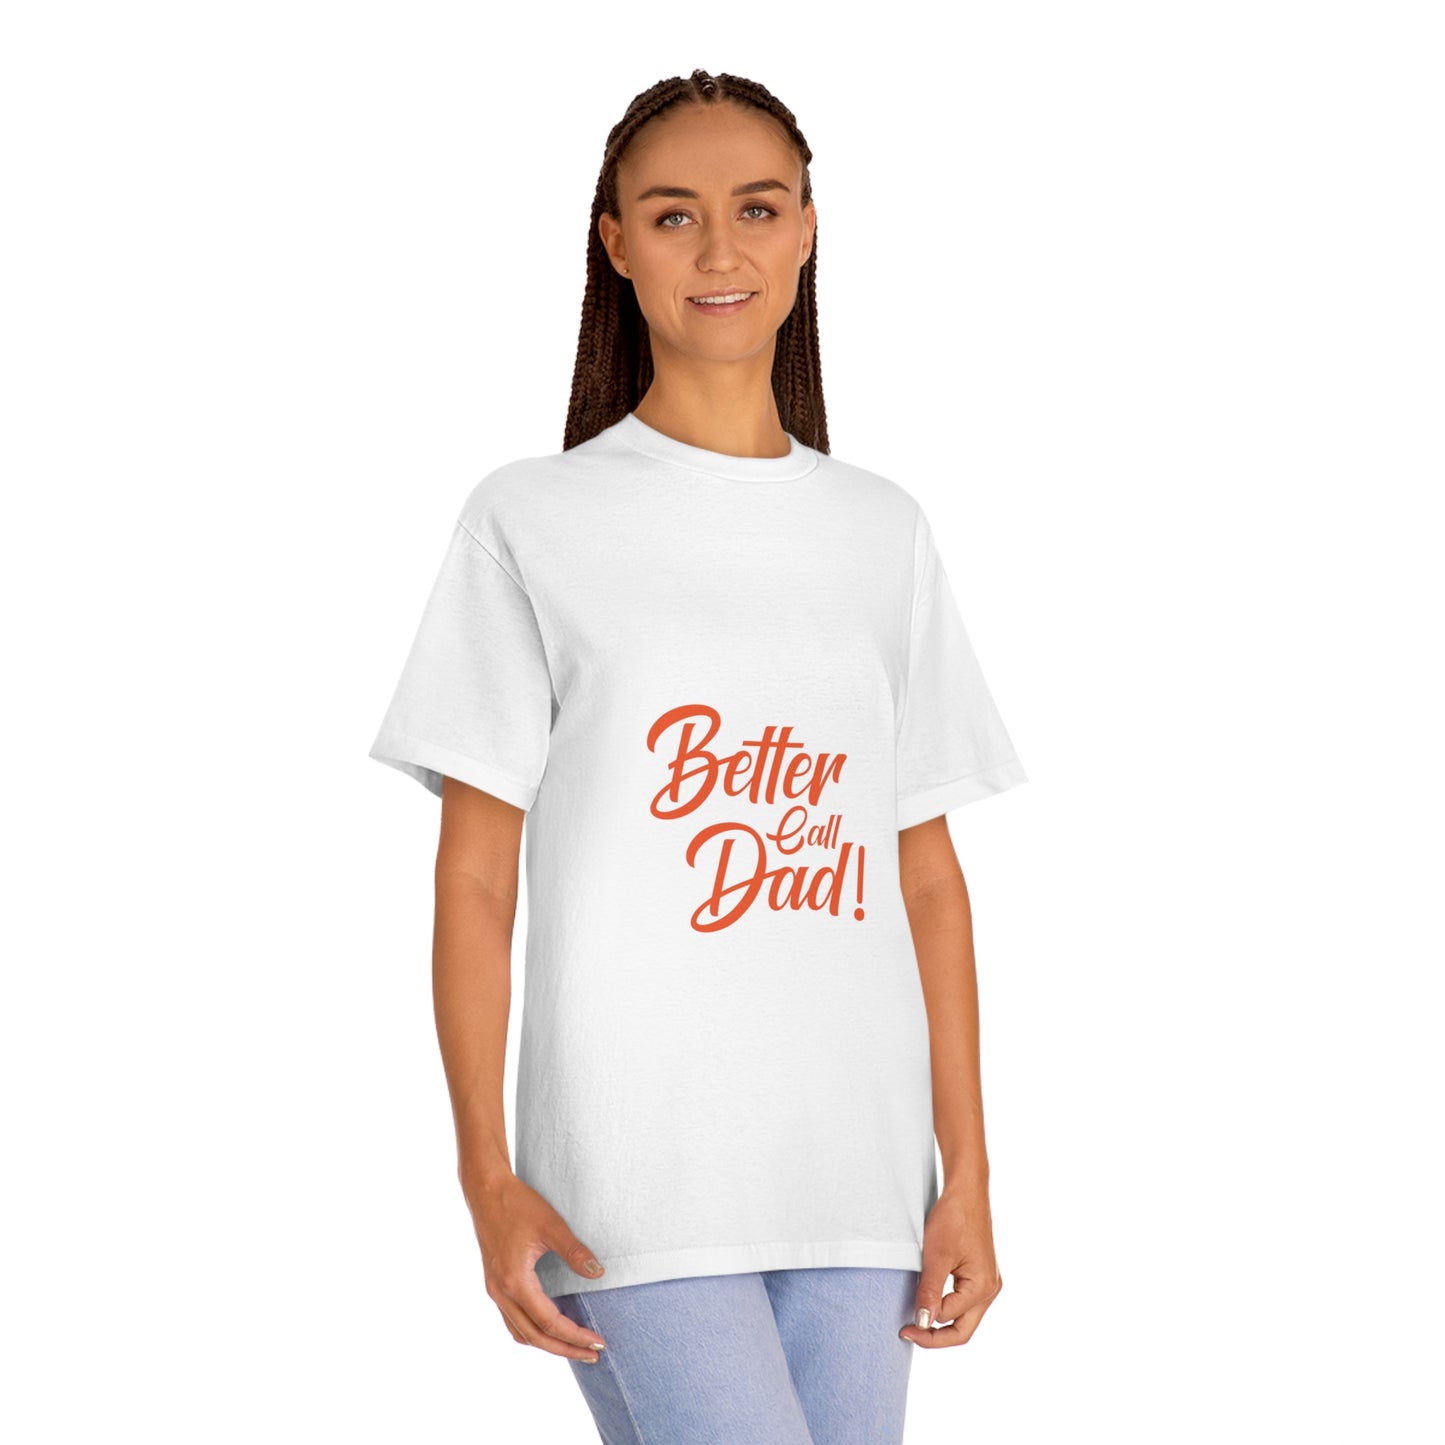 Better call me Dad Unisex Classic Tee